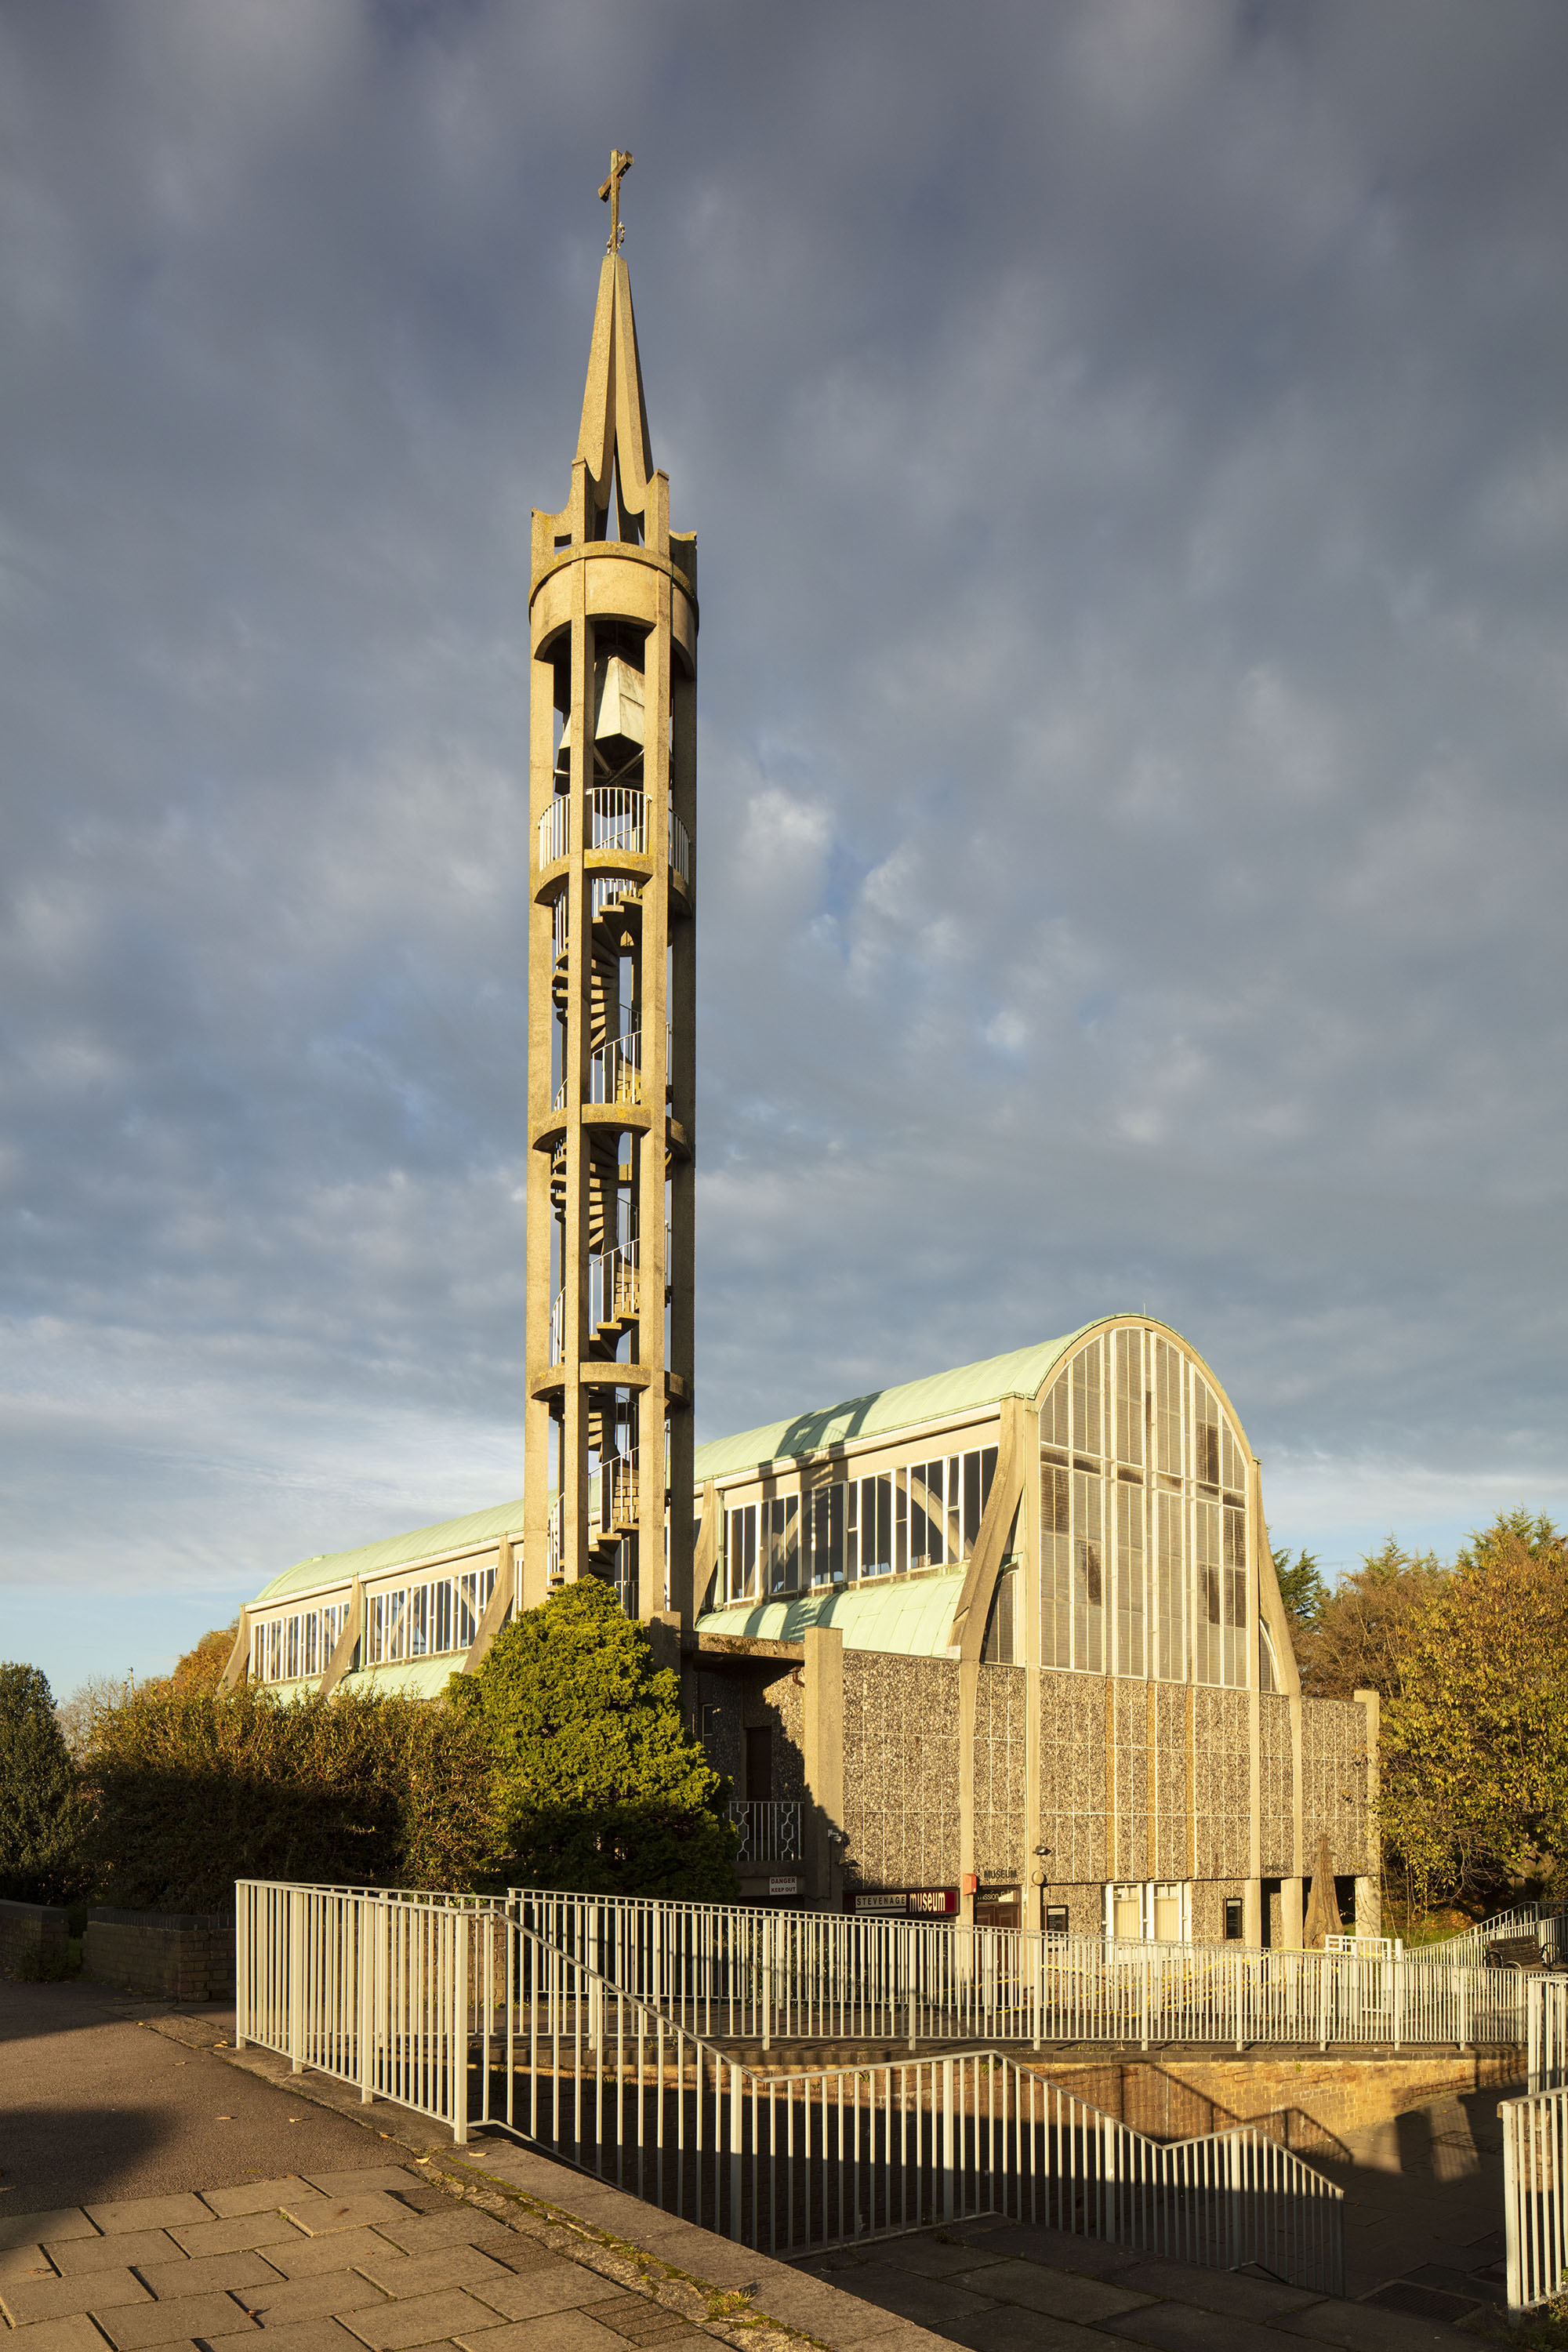 Modern church with open bell tower where the spiral staircase is visible